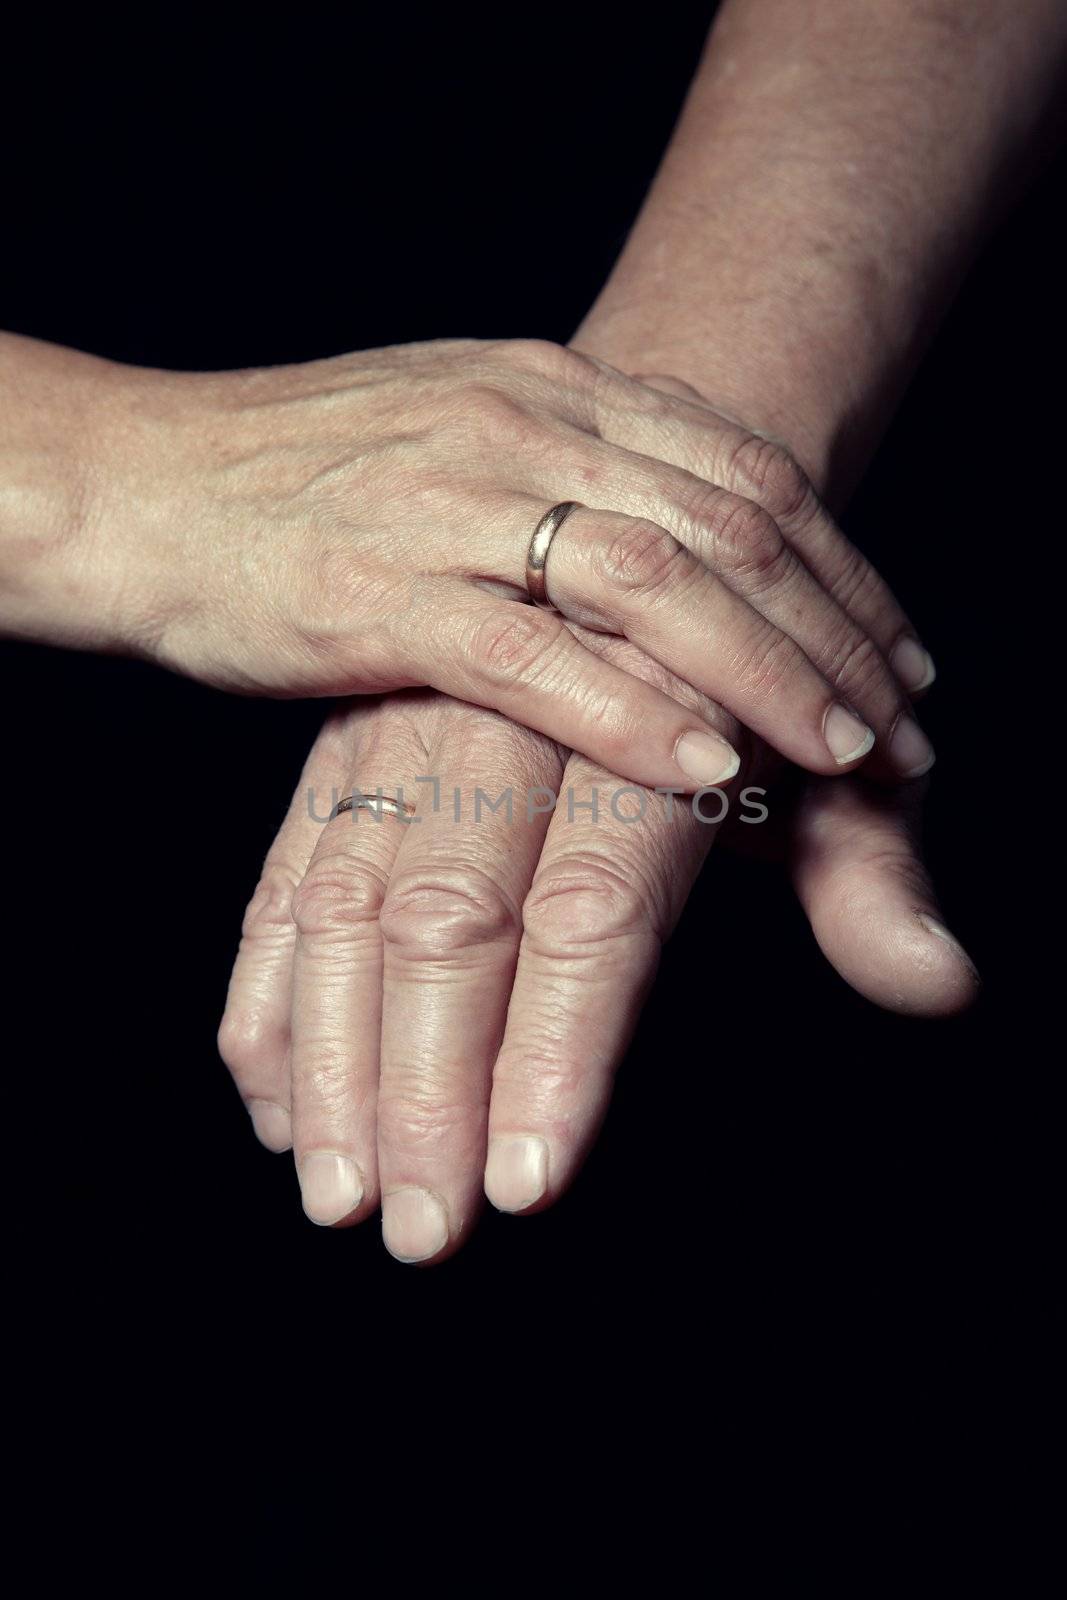 Hands of two loving senior people on a dark background